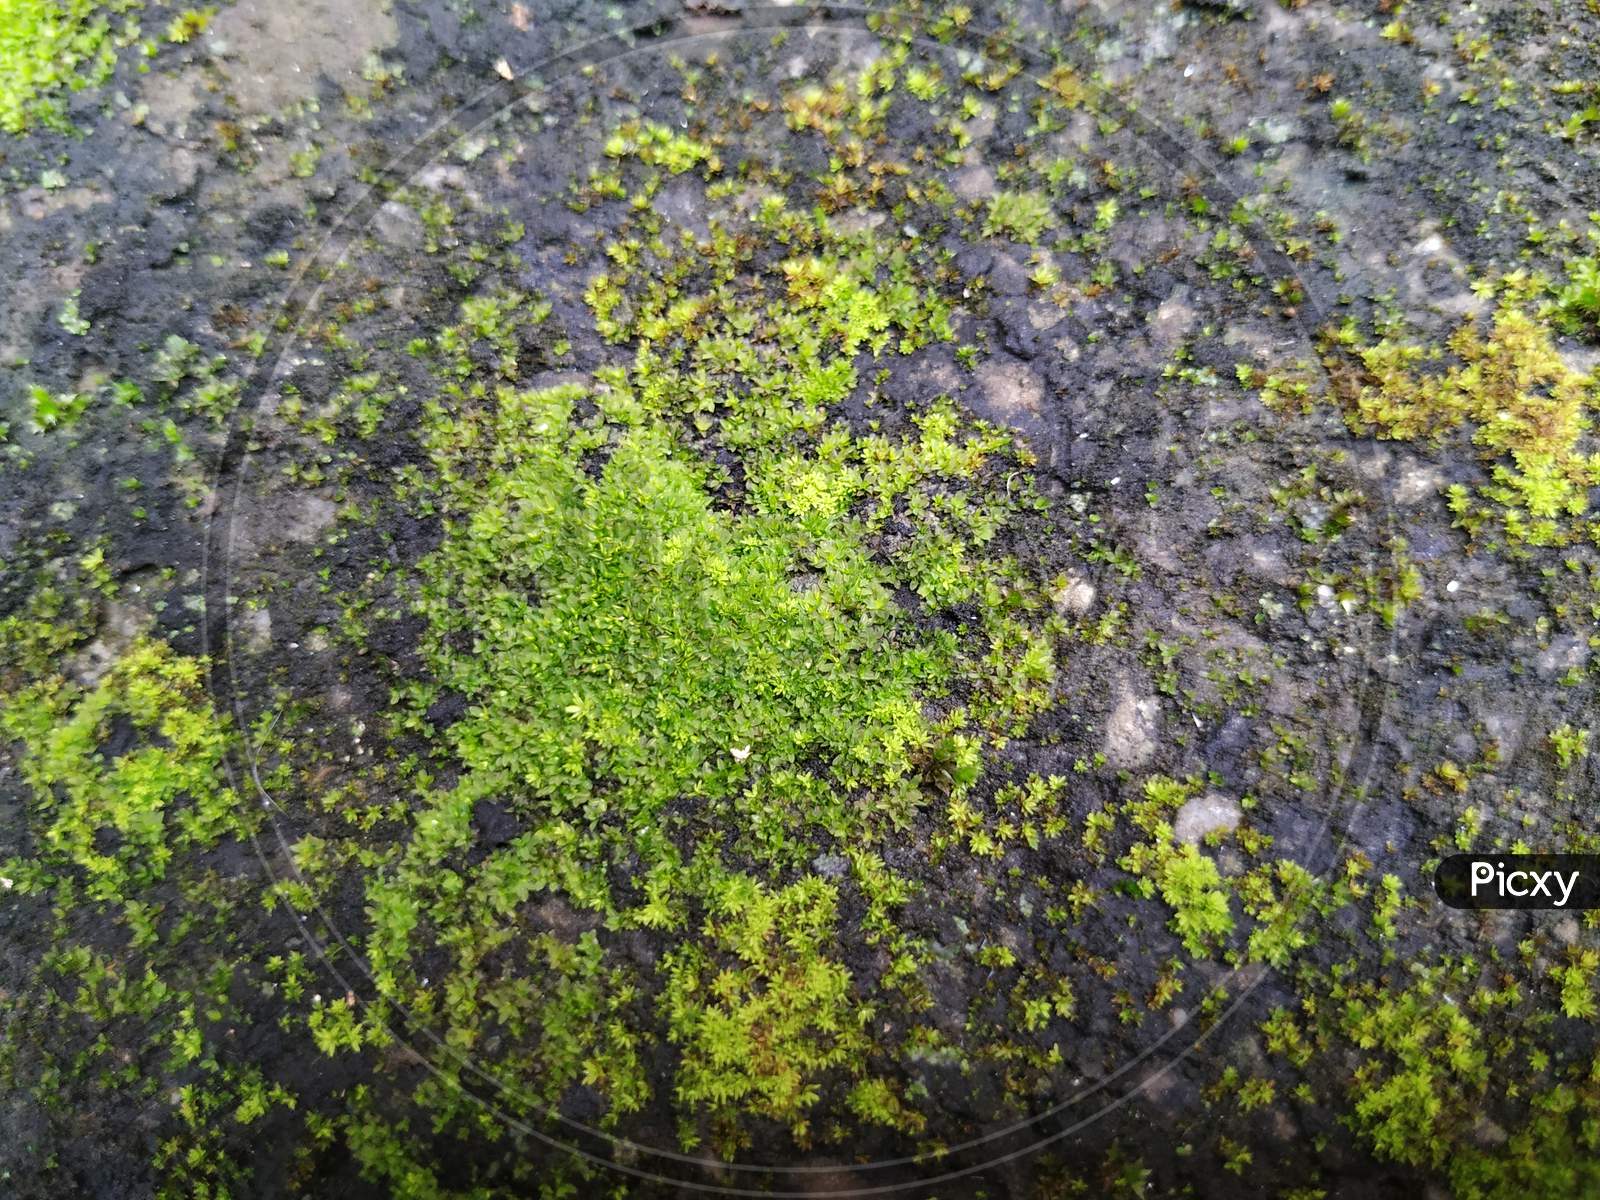 Moss And Small Plants On A Compound Wall During Rainy Season